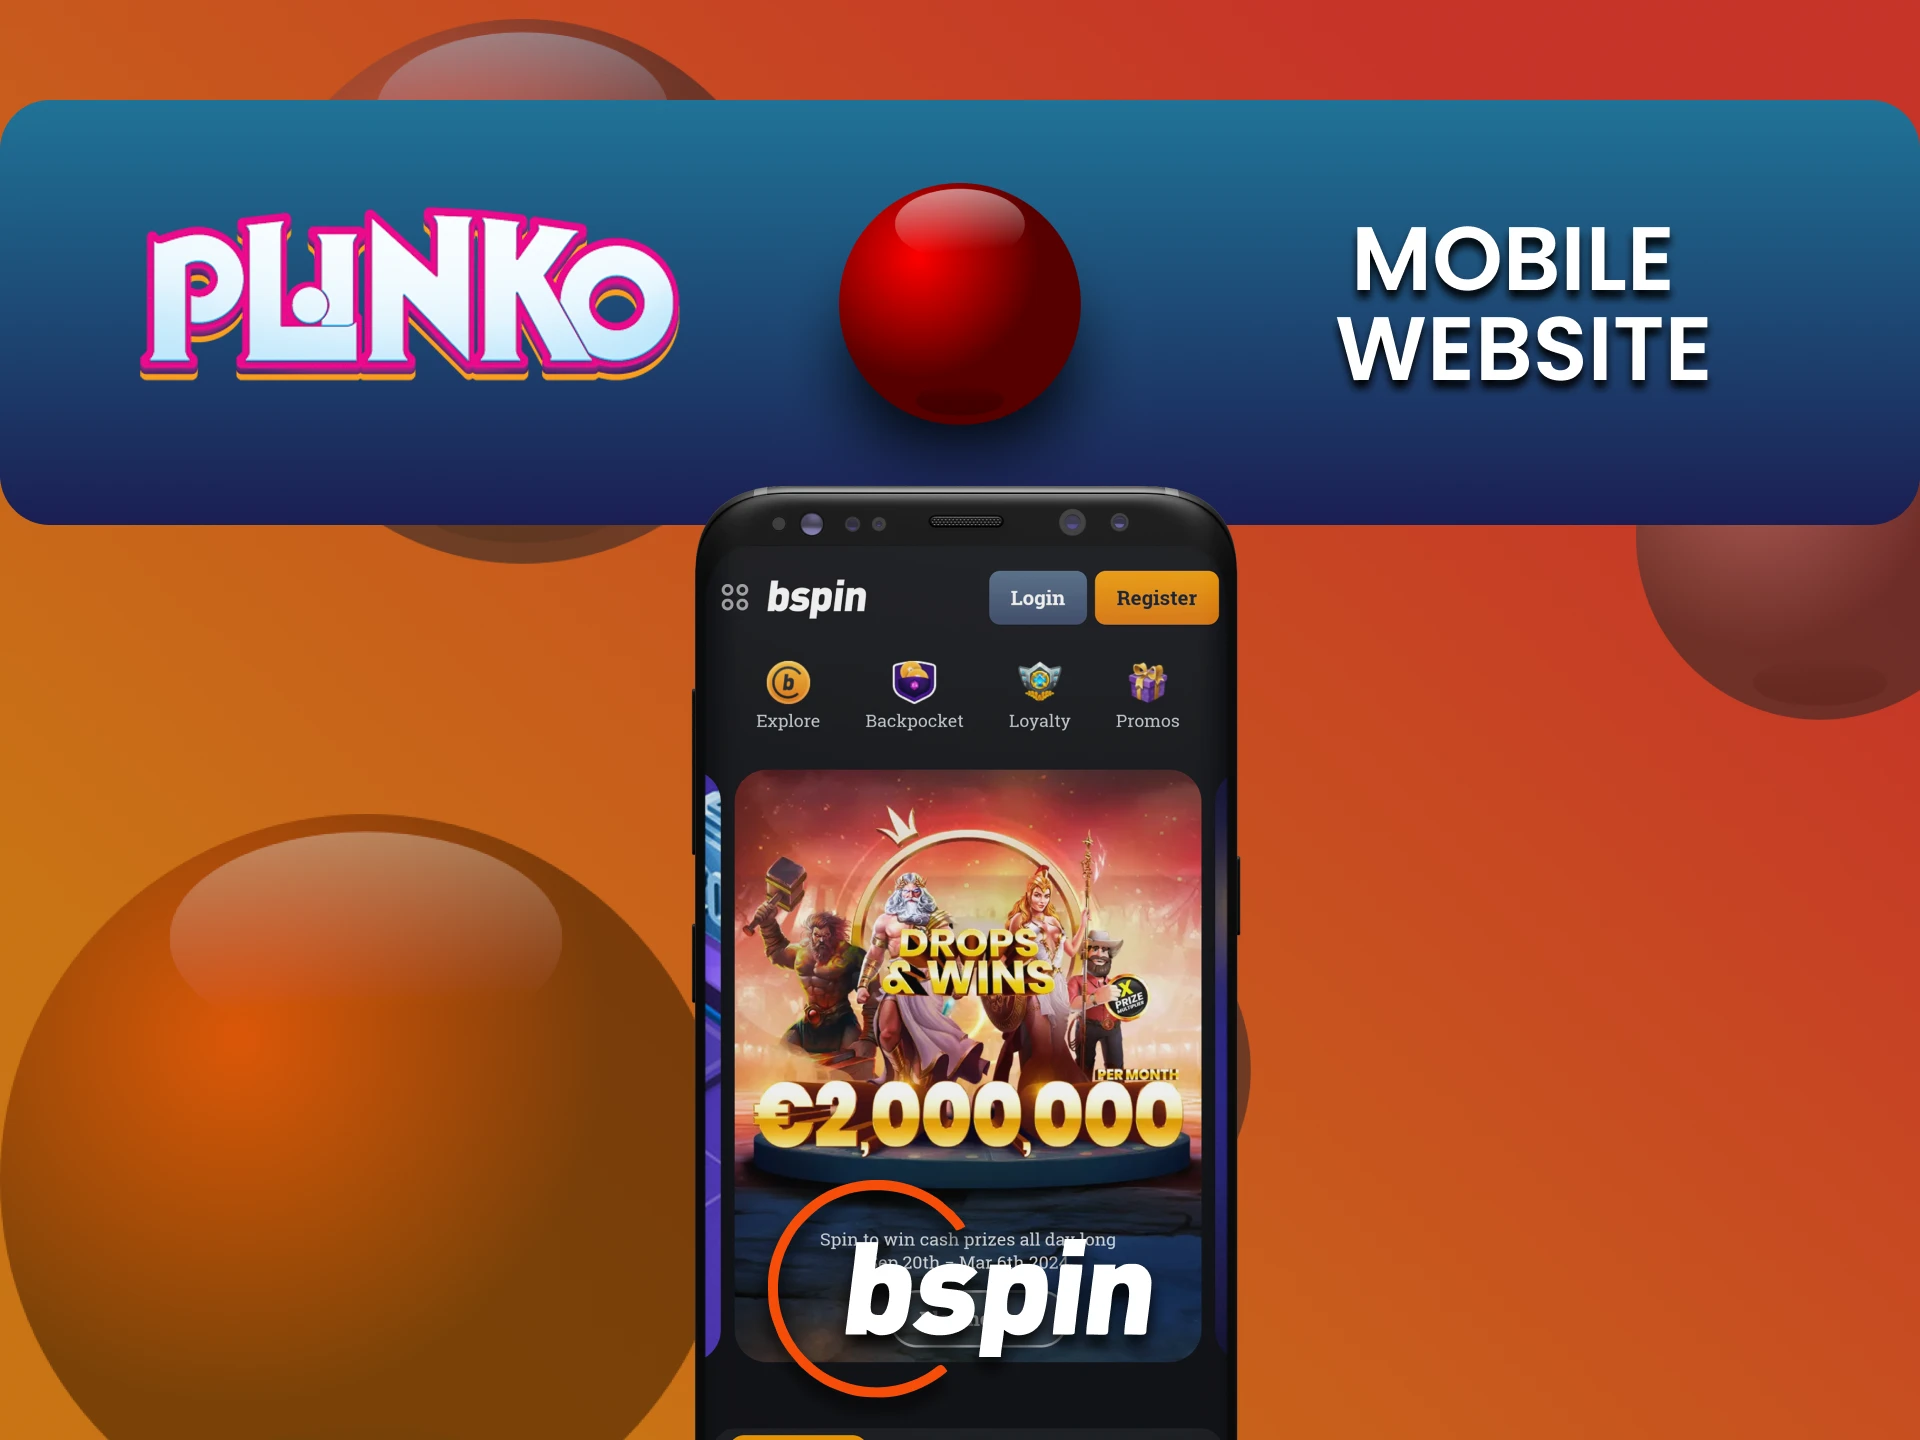 Phone is one of the ways to play Plinko on the Bspin website.